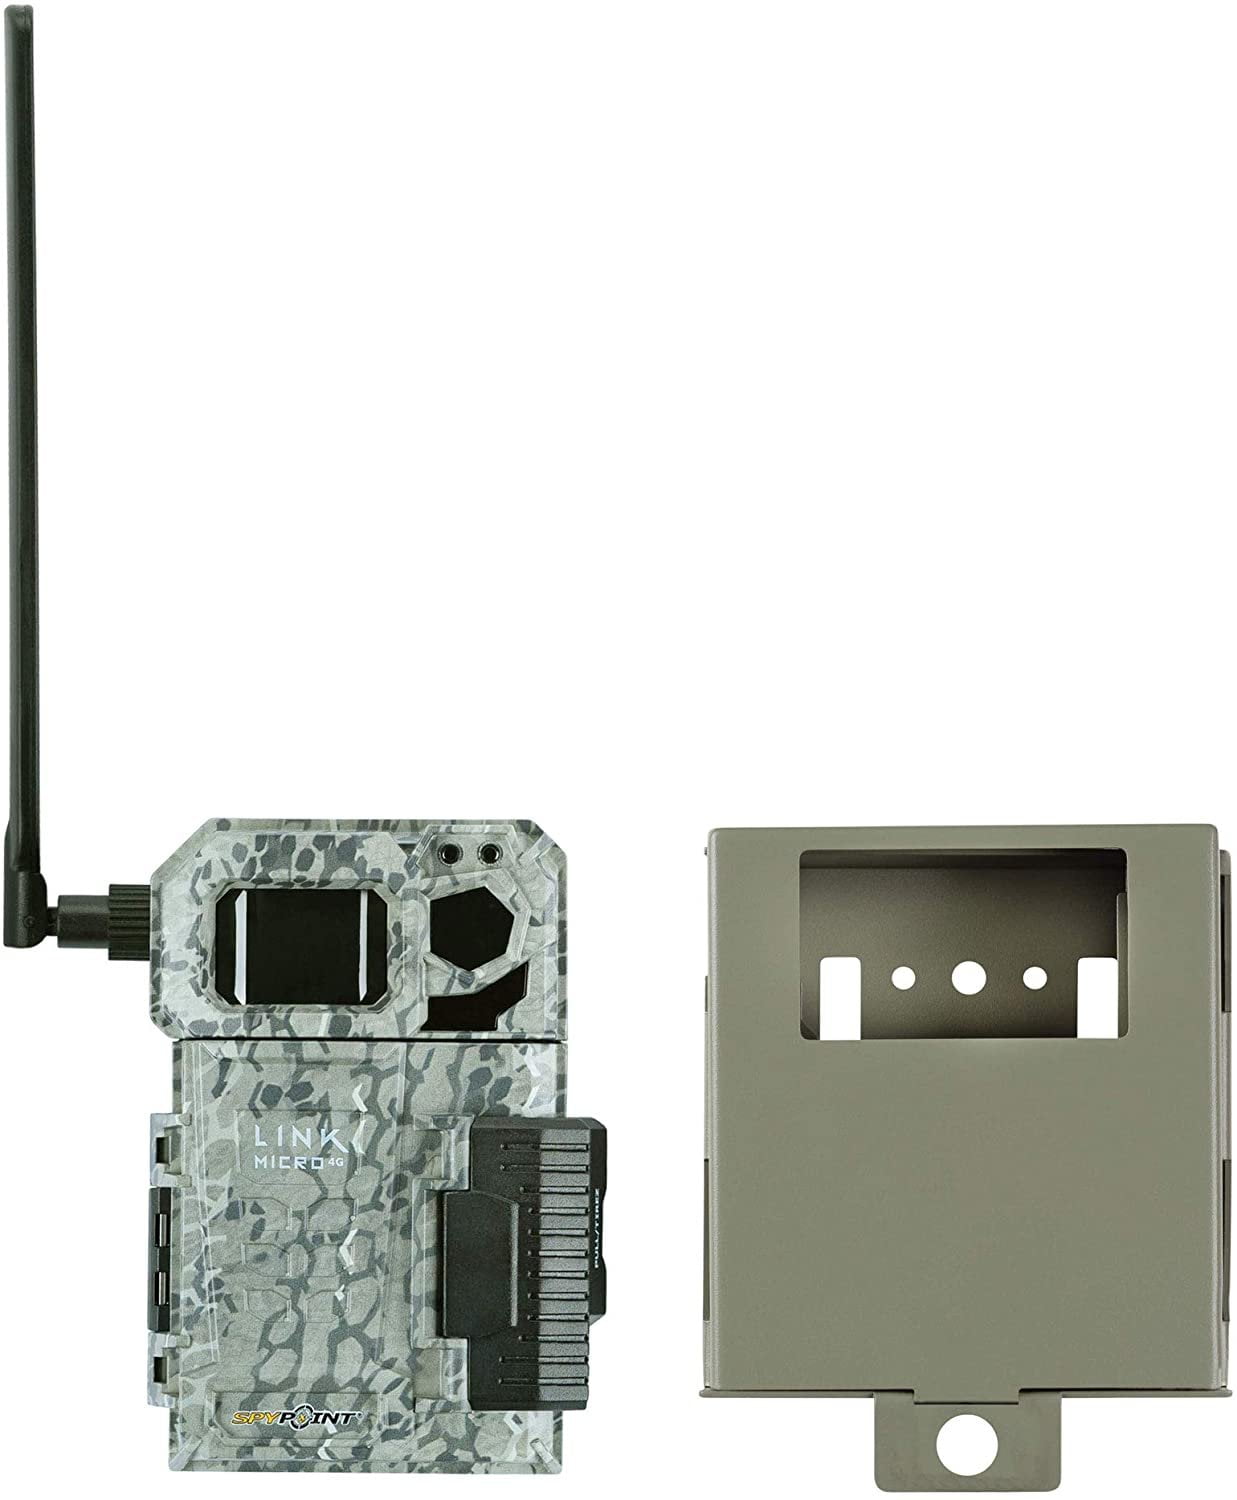 SPYPOINT Link-Micro-LTE Cellular Trail Camera with Batteries USA Nationwide AT&T and Mount Micro SD Card 